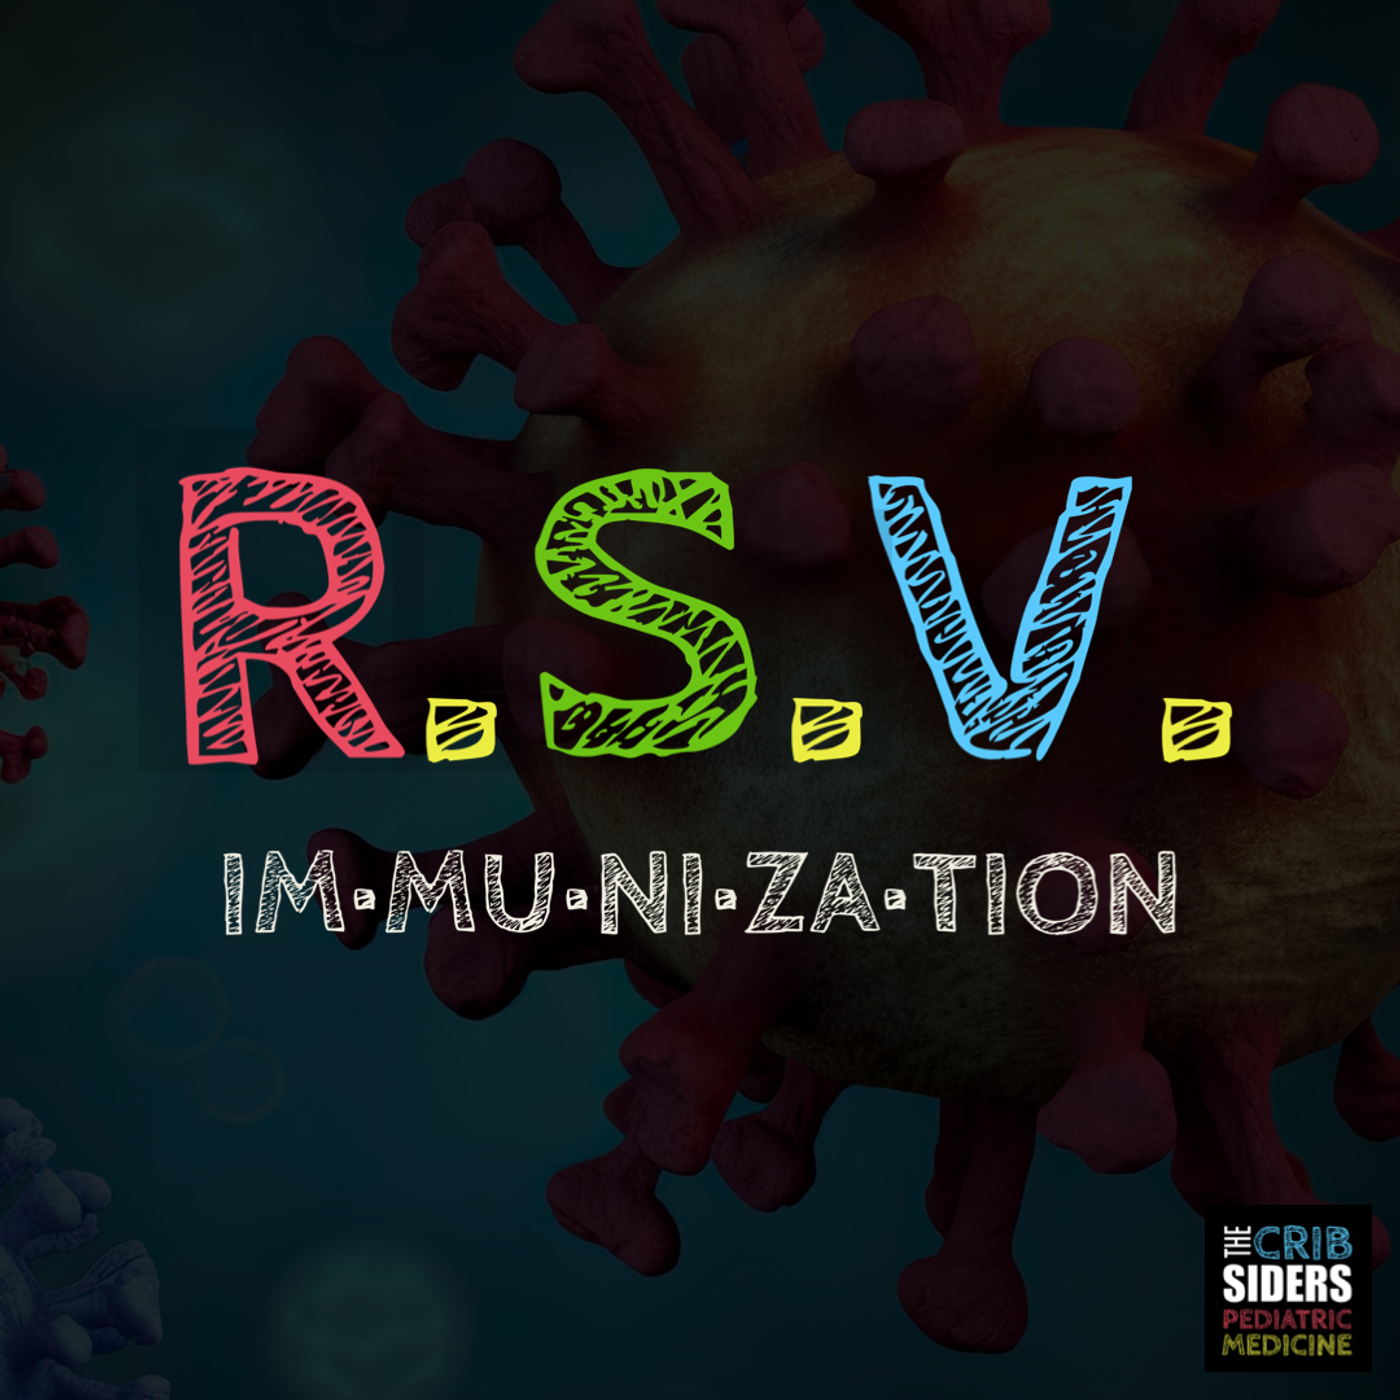 R.S.V. Immunization with The Cribsiders